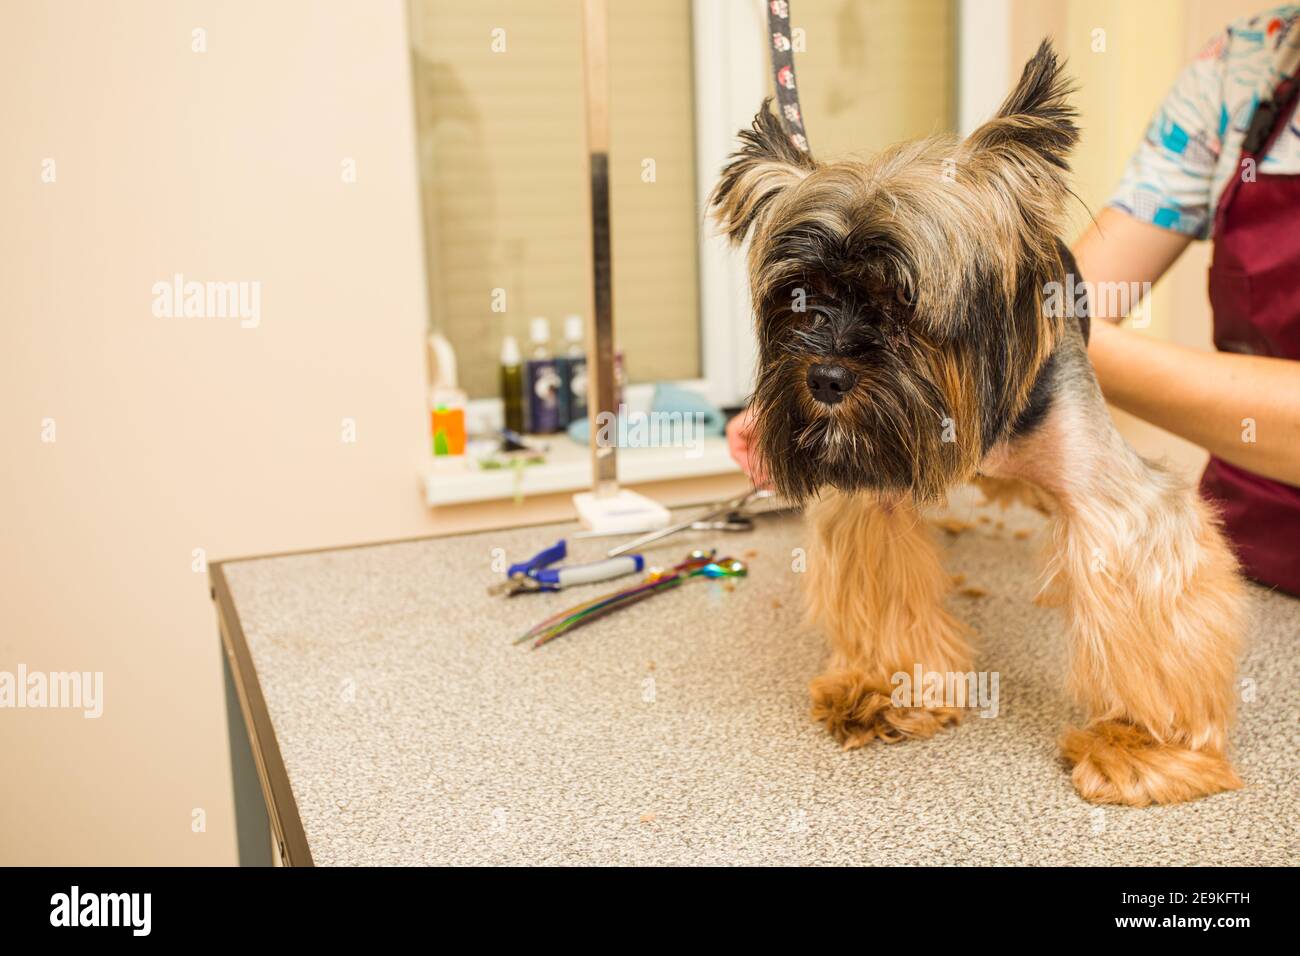 the shaggy yorkshire terrier gets a haircut at the salon Stock Photo